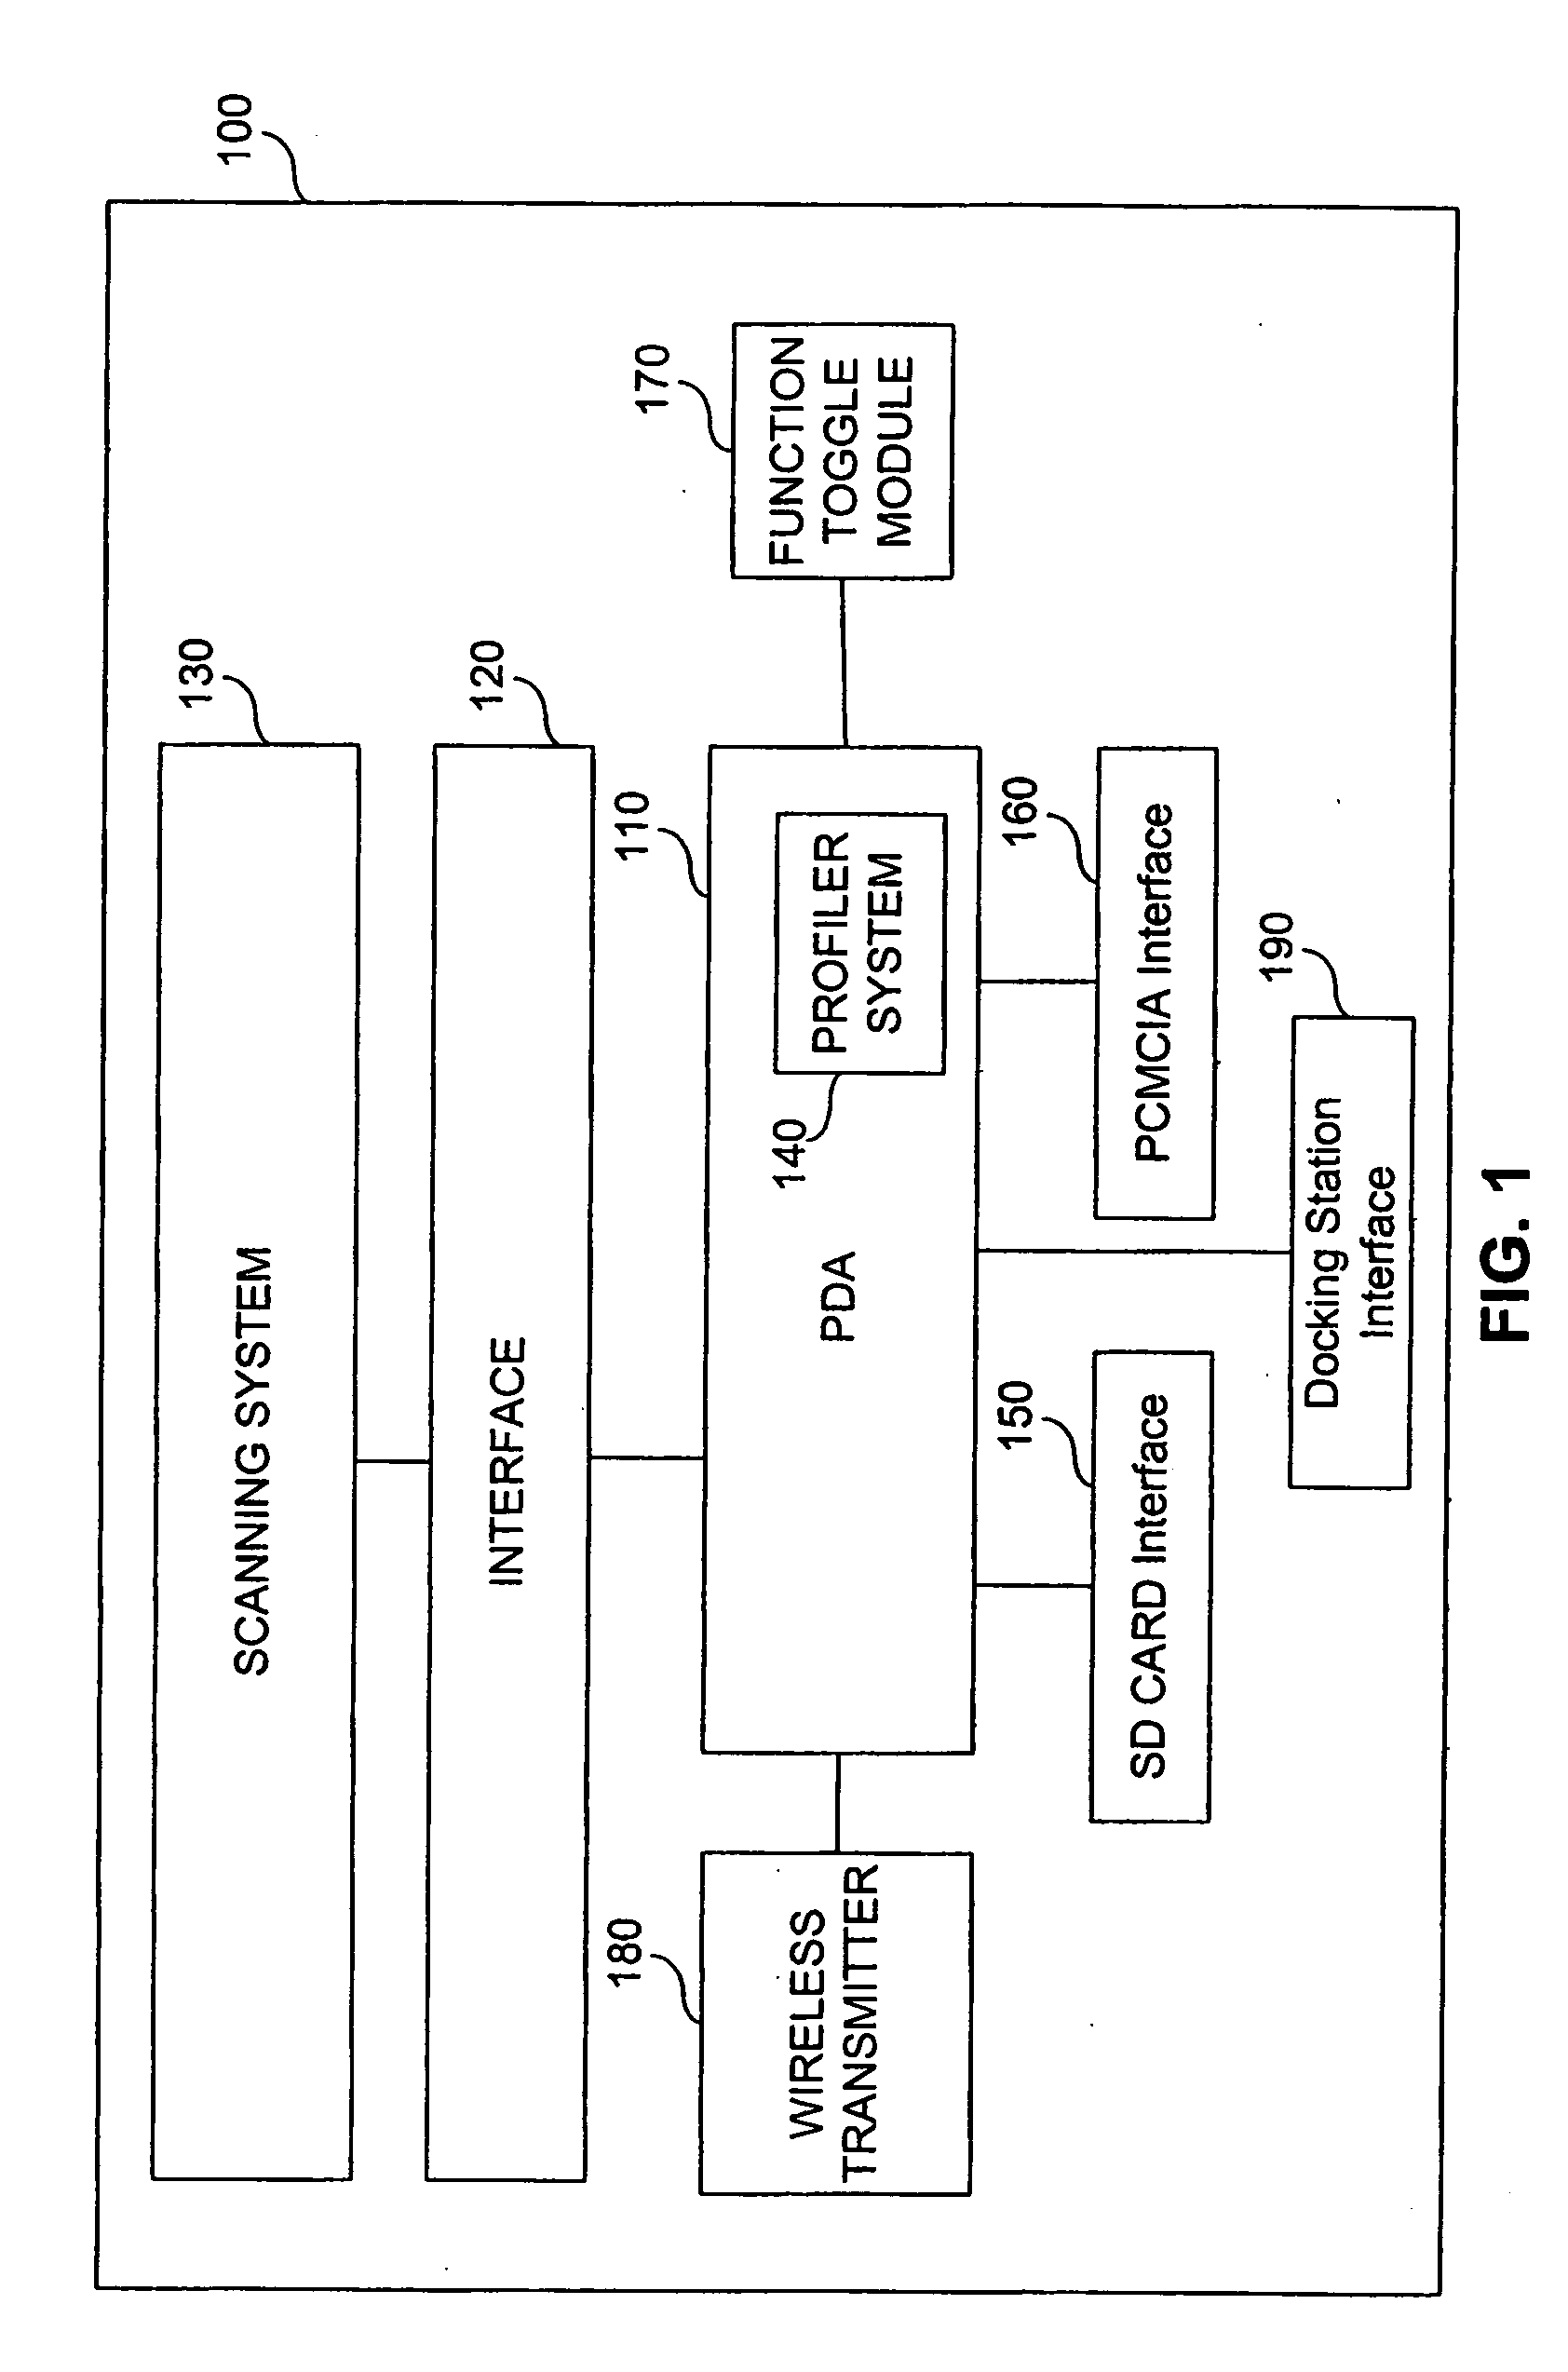 Hand-held personal identification analysis device and methods of use